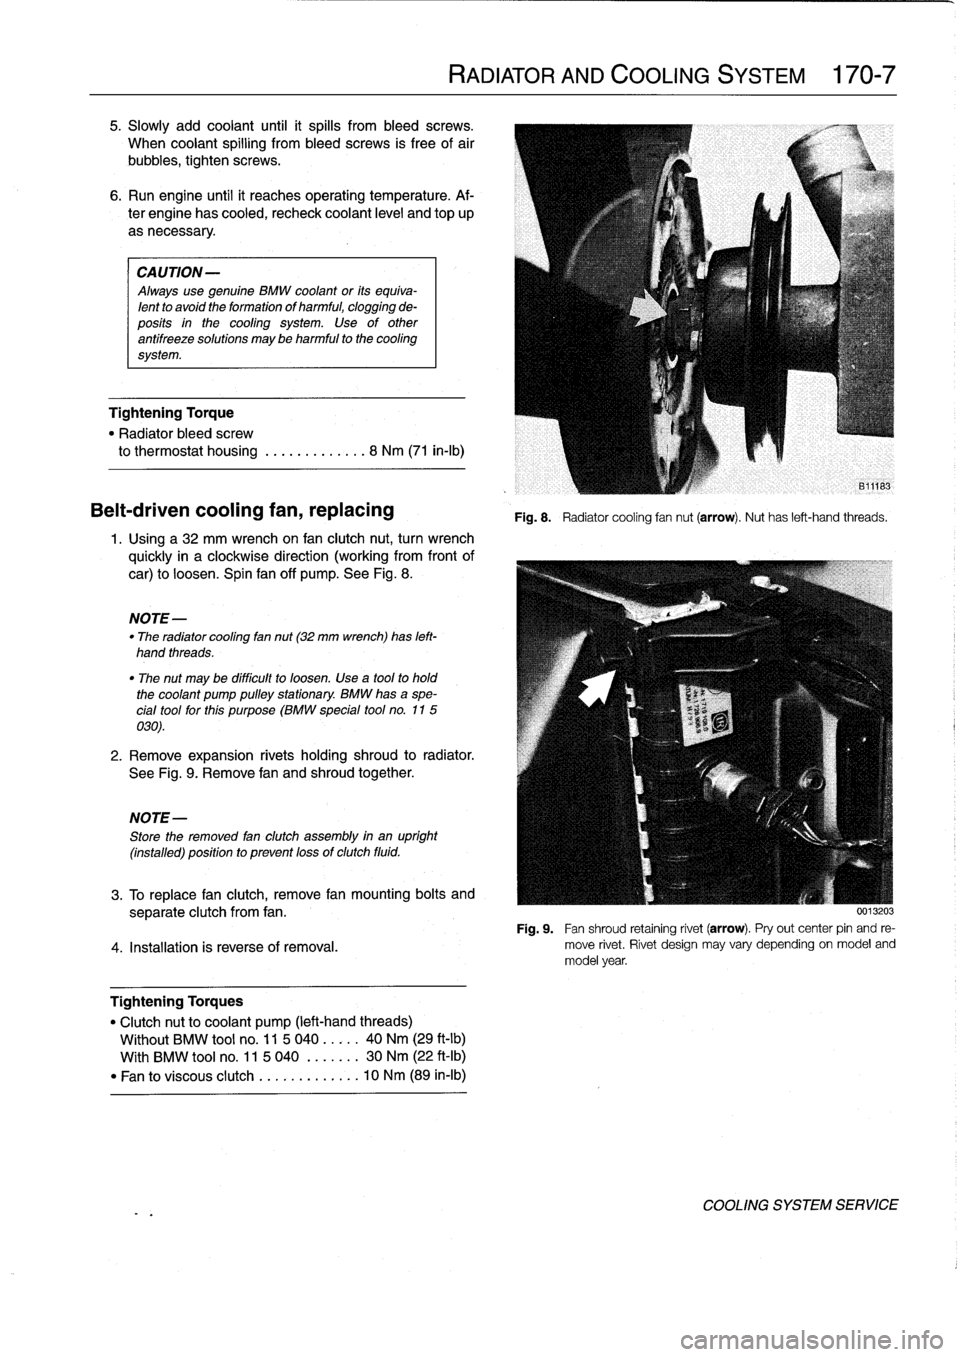 BMW 323i 1993 E36 Workshop Manual 5
.
Slowly
add
coolant
until
it
spills
from
bleed
screws
.

When
coolant
spillíng
from
bleed
screws
is
free
of
air

bubbies,
tighten
screws
.

6
.
Run
engine
until
it
reaches
operatíng
temperature
.